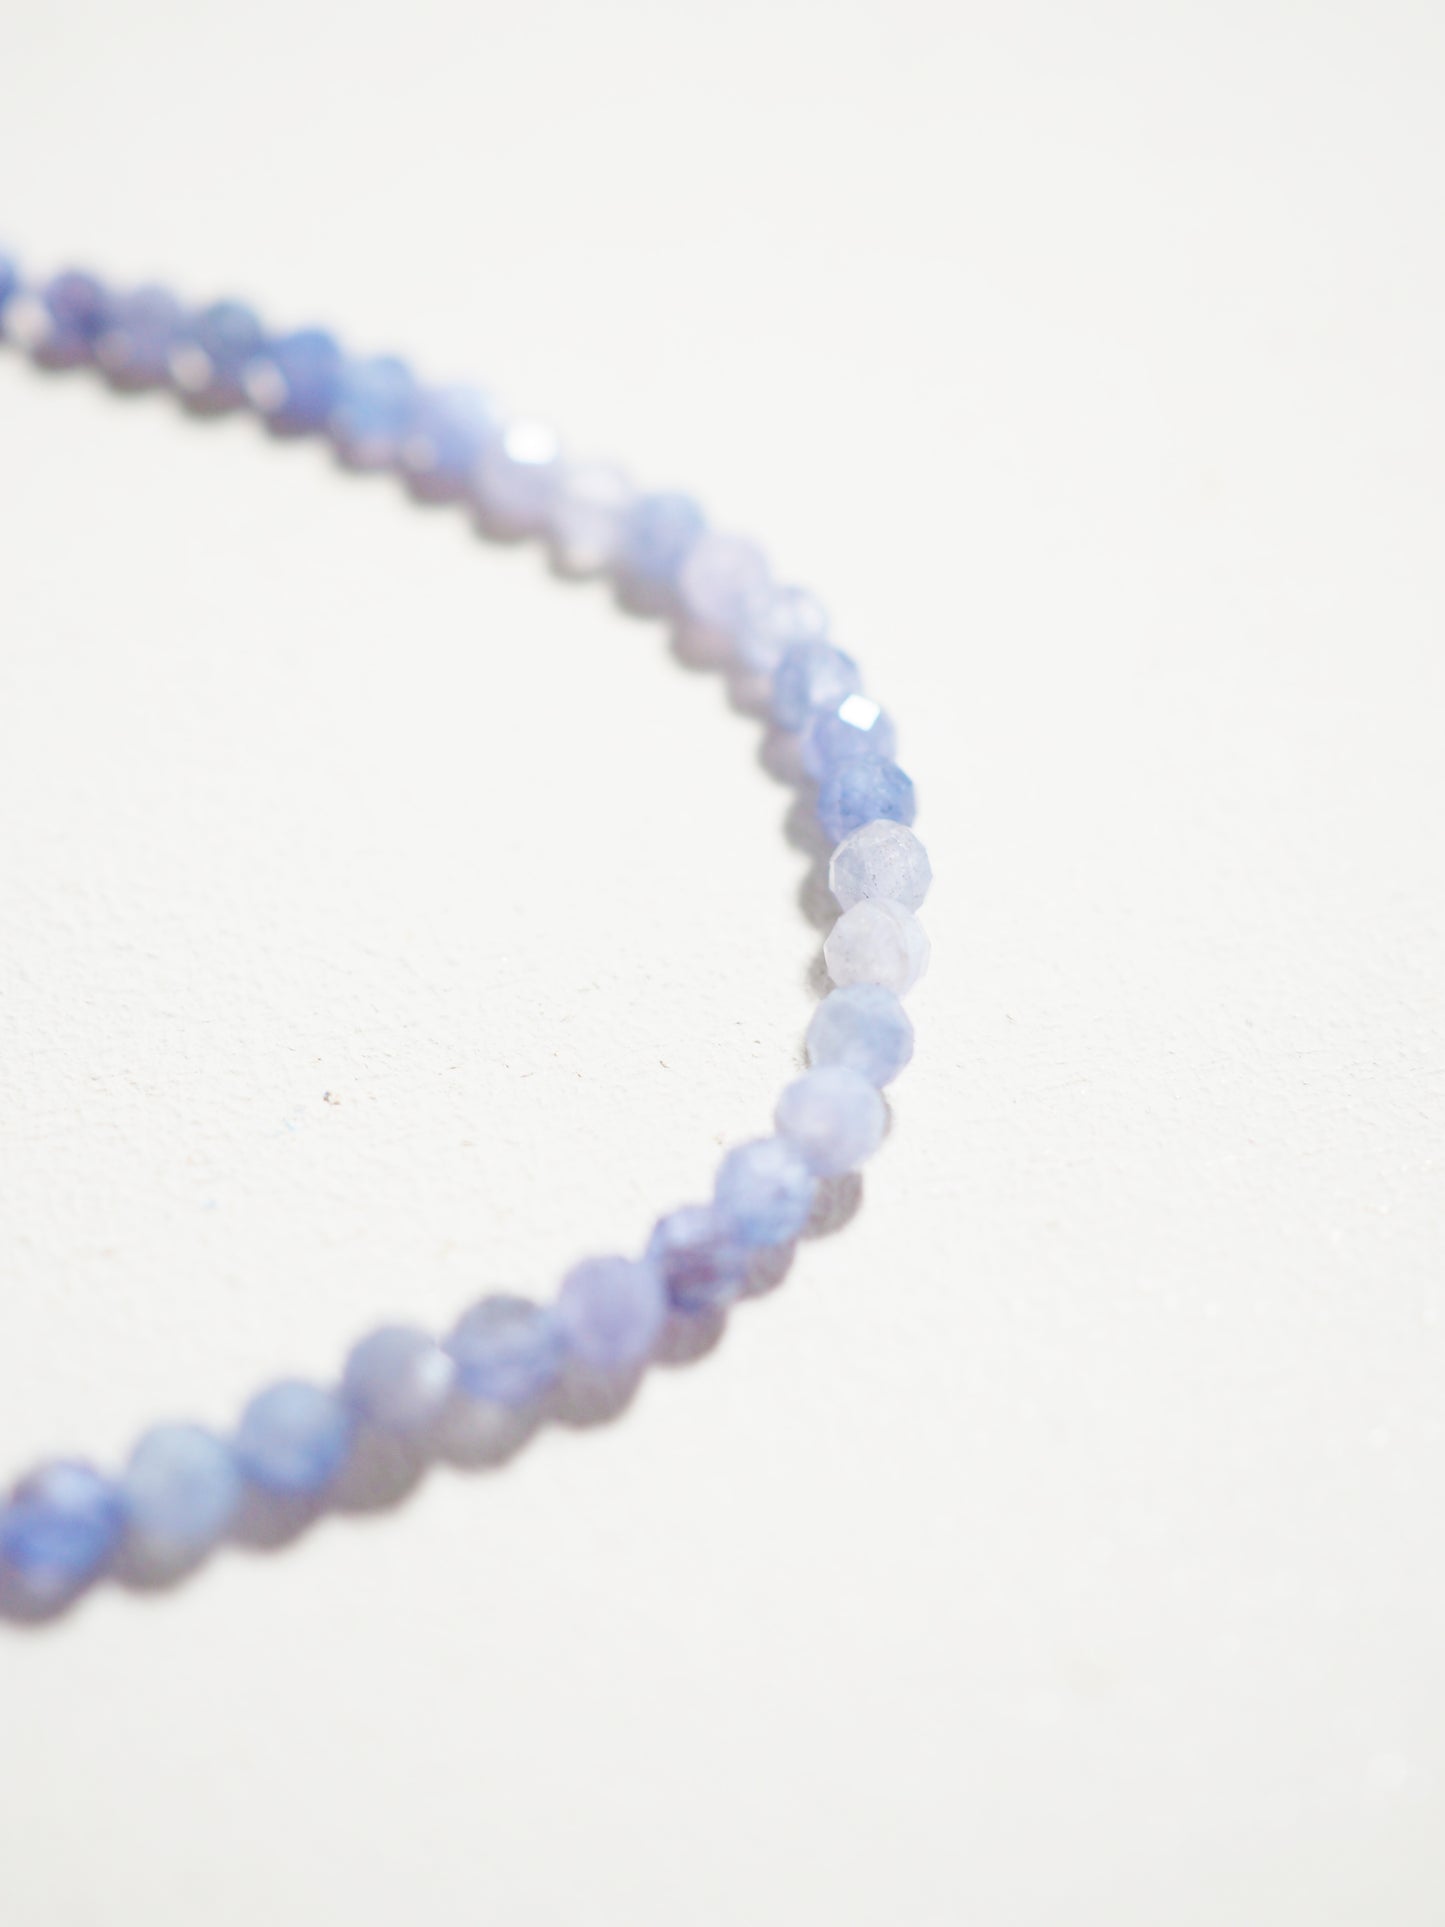 Facettiertes Tansanit Armband . Faceted Tanzanite Bracelet 3mm - High Quality